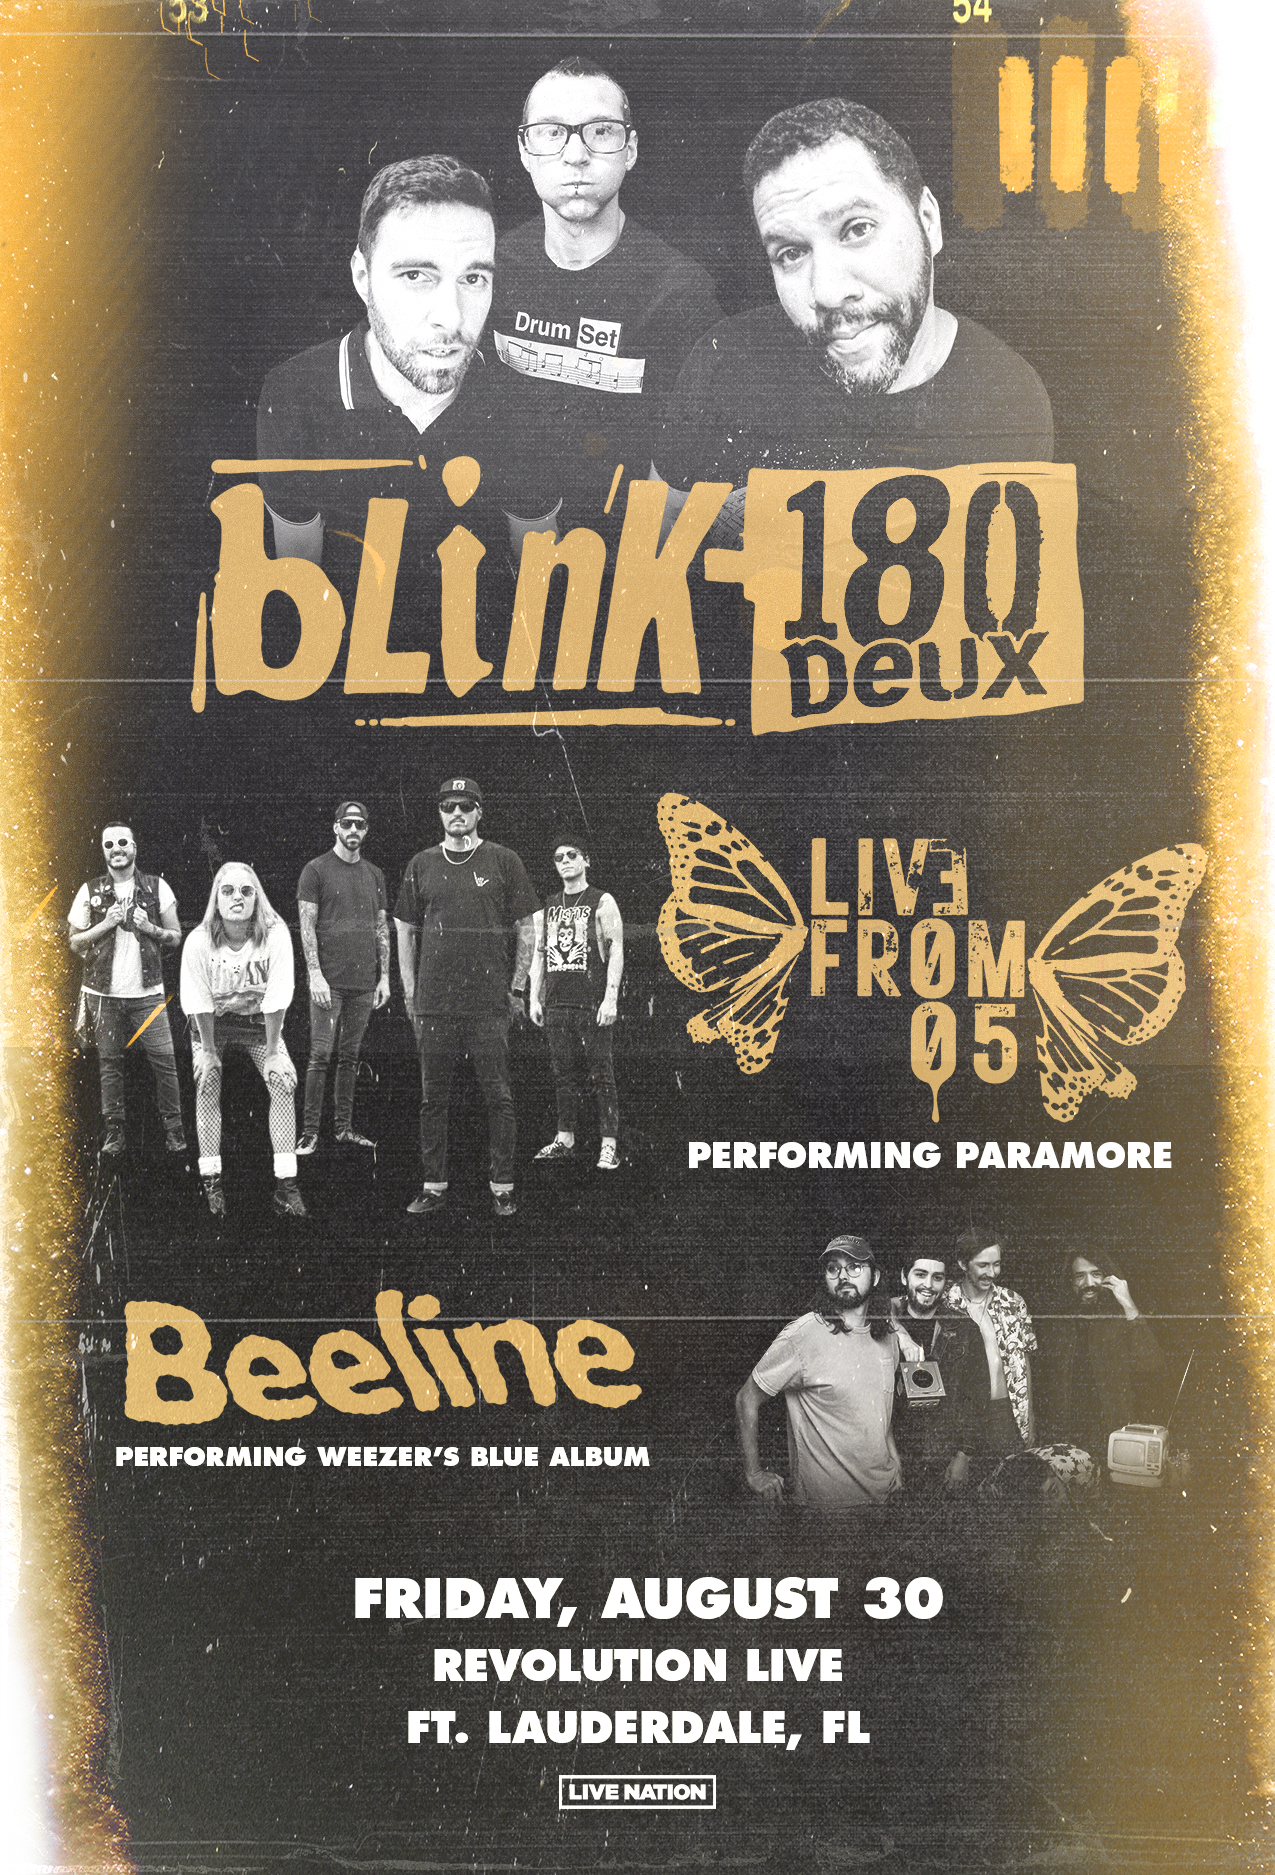 Blink-180 Deux: A Blink-182 Tribute with Live From 05 and Beeline